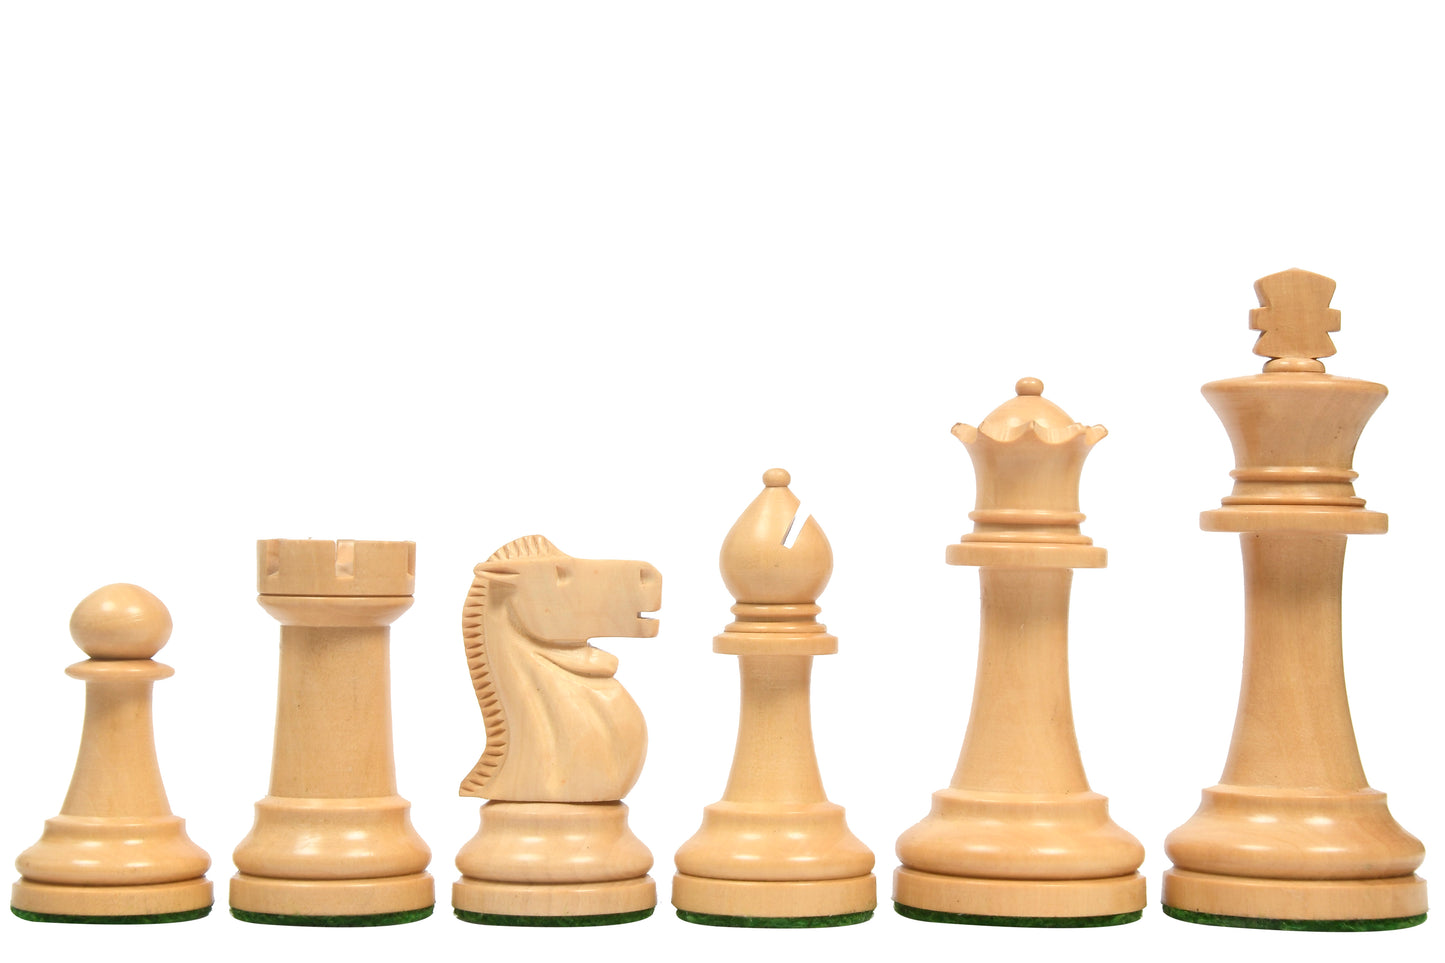 The Canadian Staunton Series Chess Pieces in Ebonized Boxwood / Natural Boxwood - 3.3" King